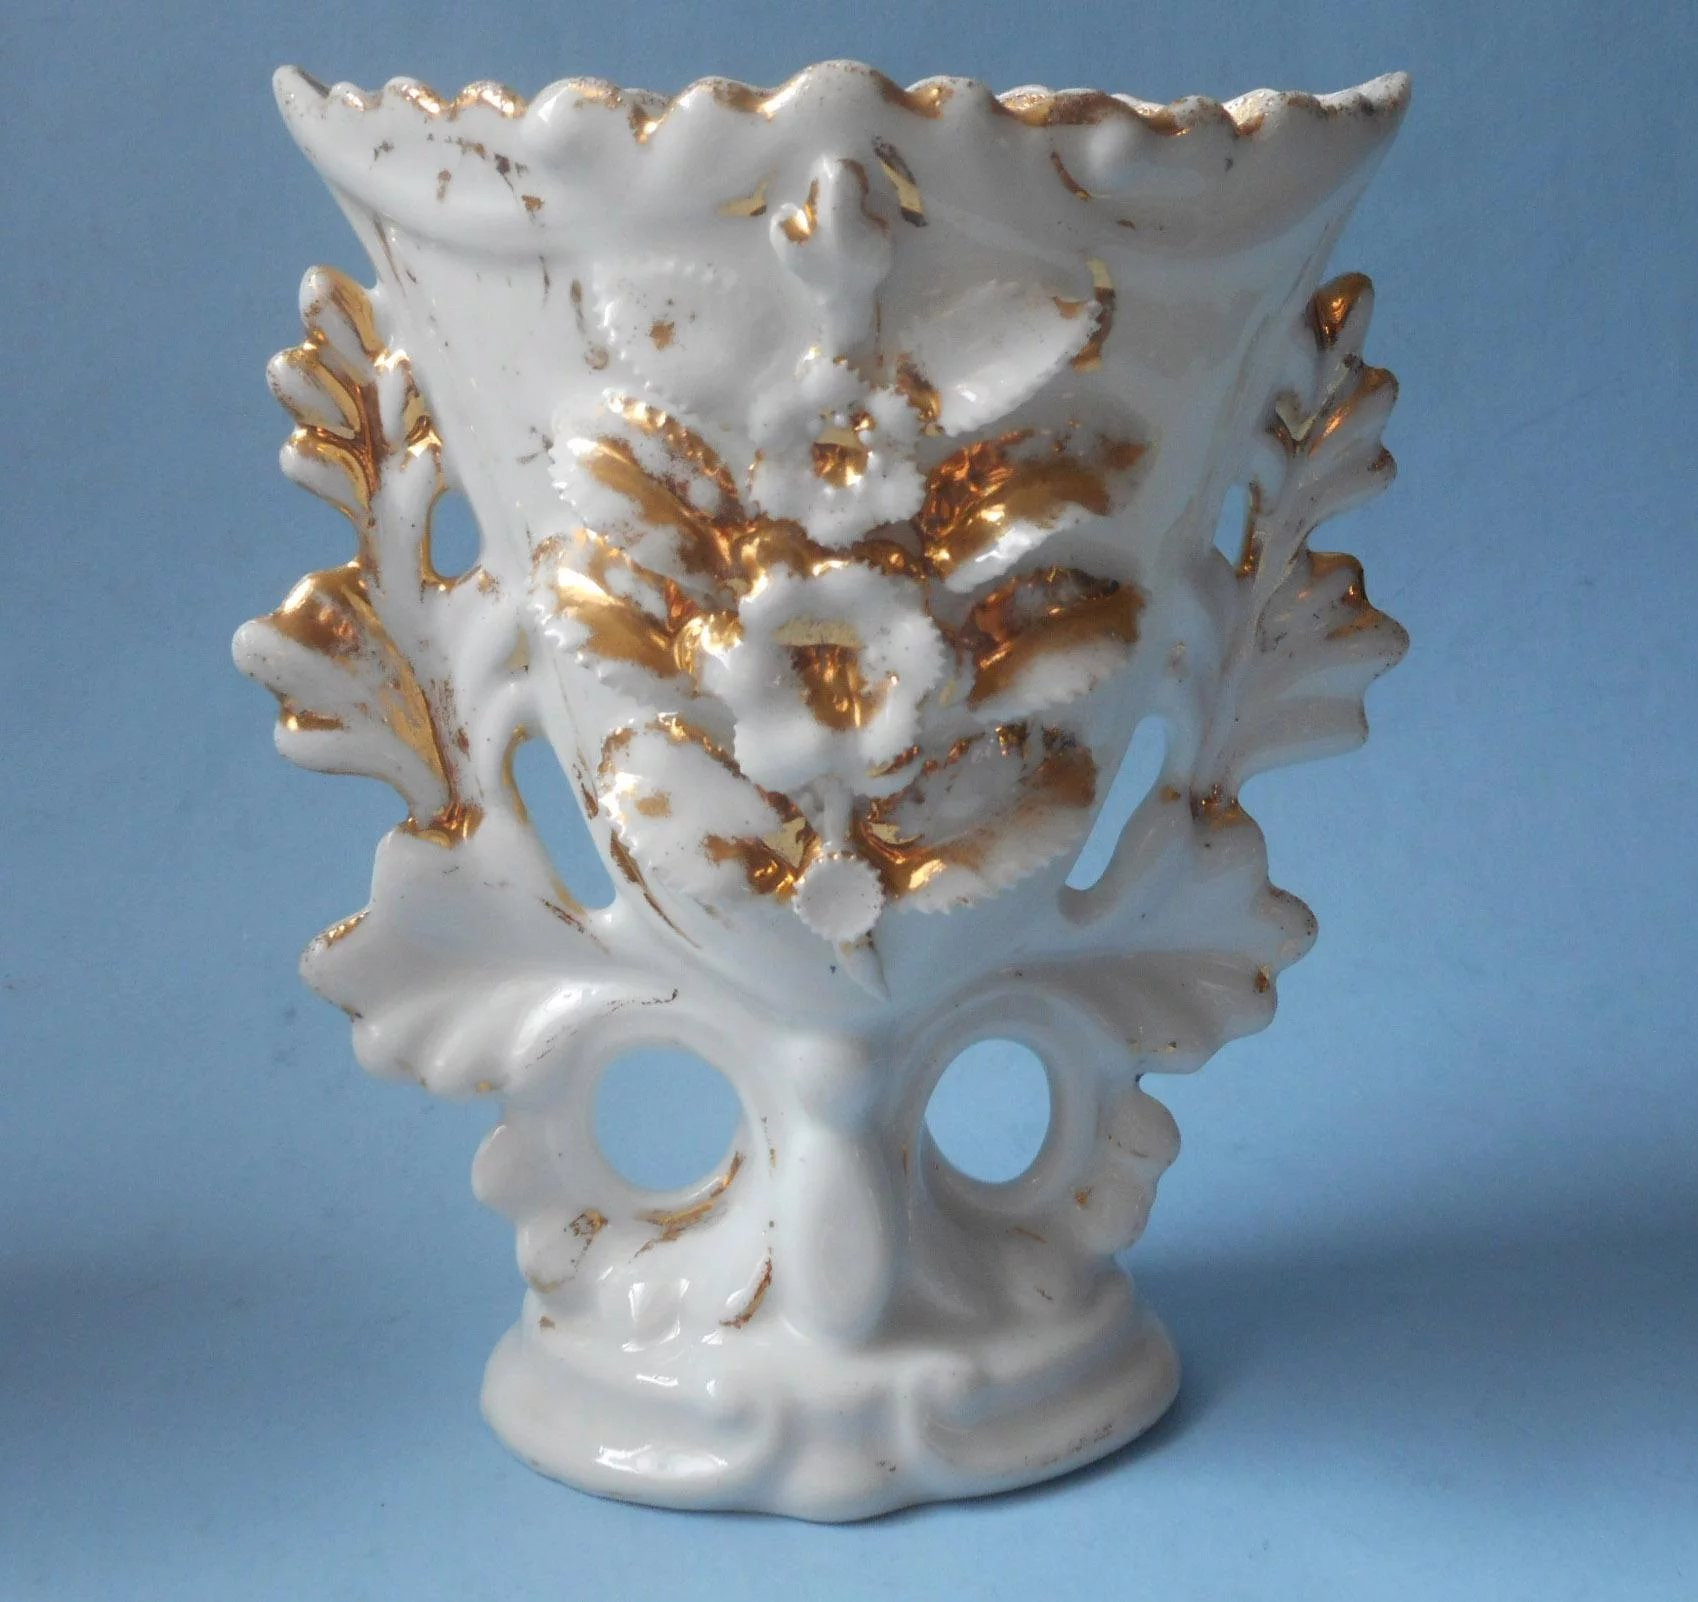 26 Ideal White and Gold Ceramic Vase 2024 free download white and gold ceramic vase of victorian mantel vases pair gold white antique china mercy maude regarding victorian mantel vases pair gold white antique china click to expand